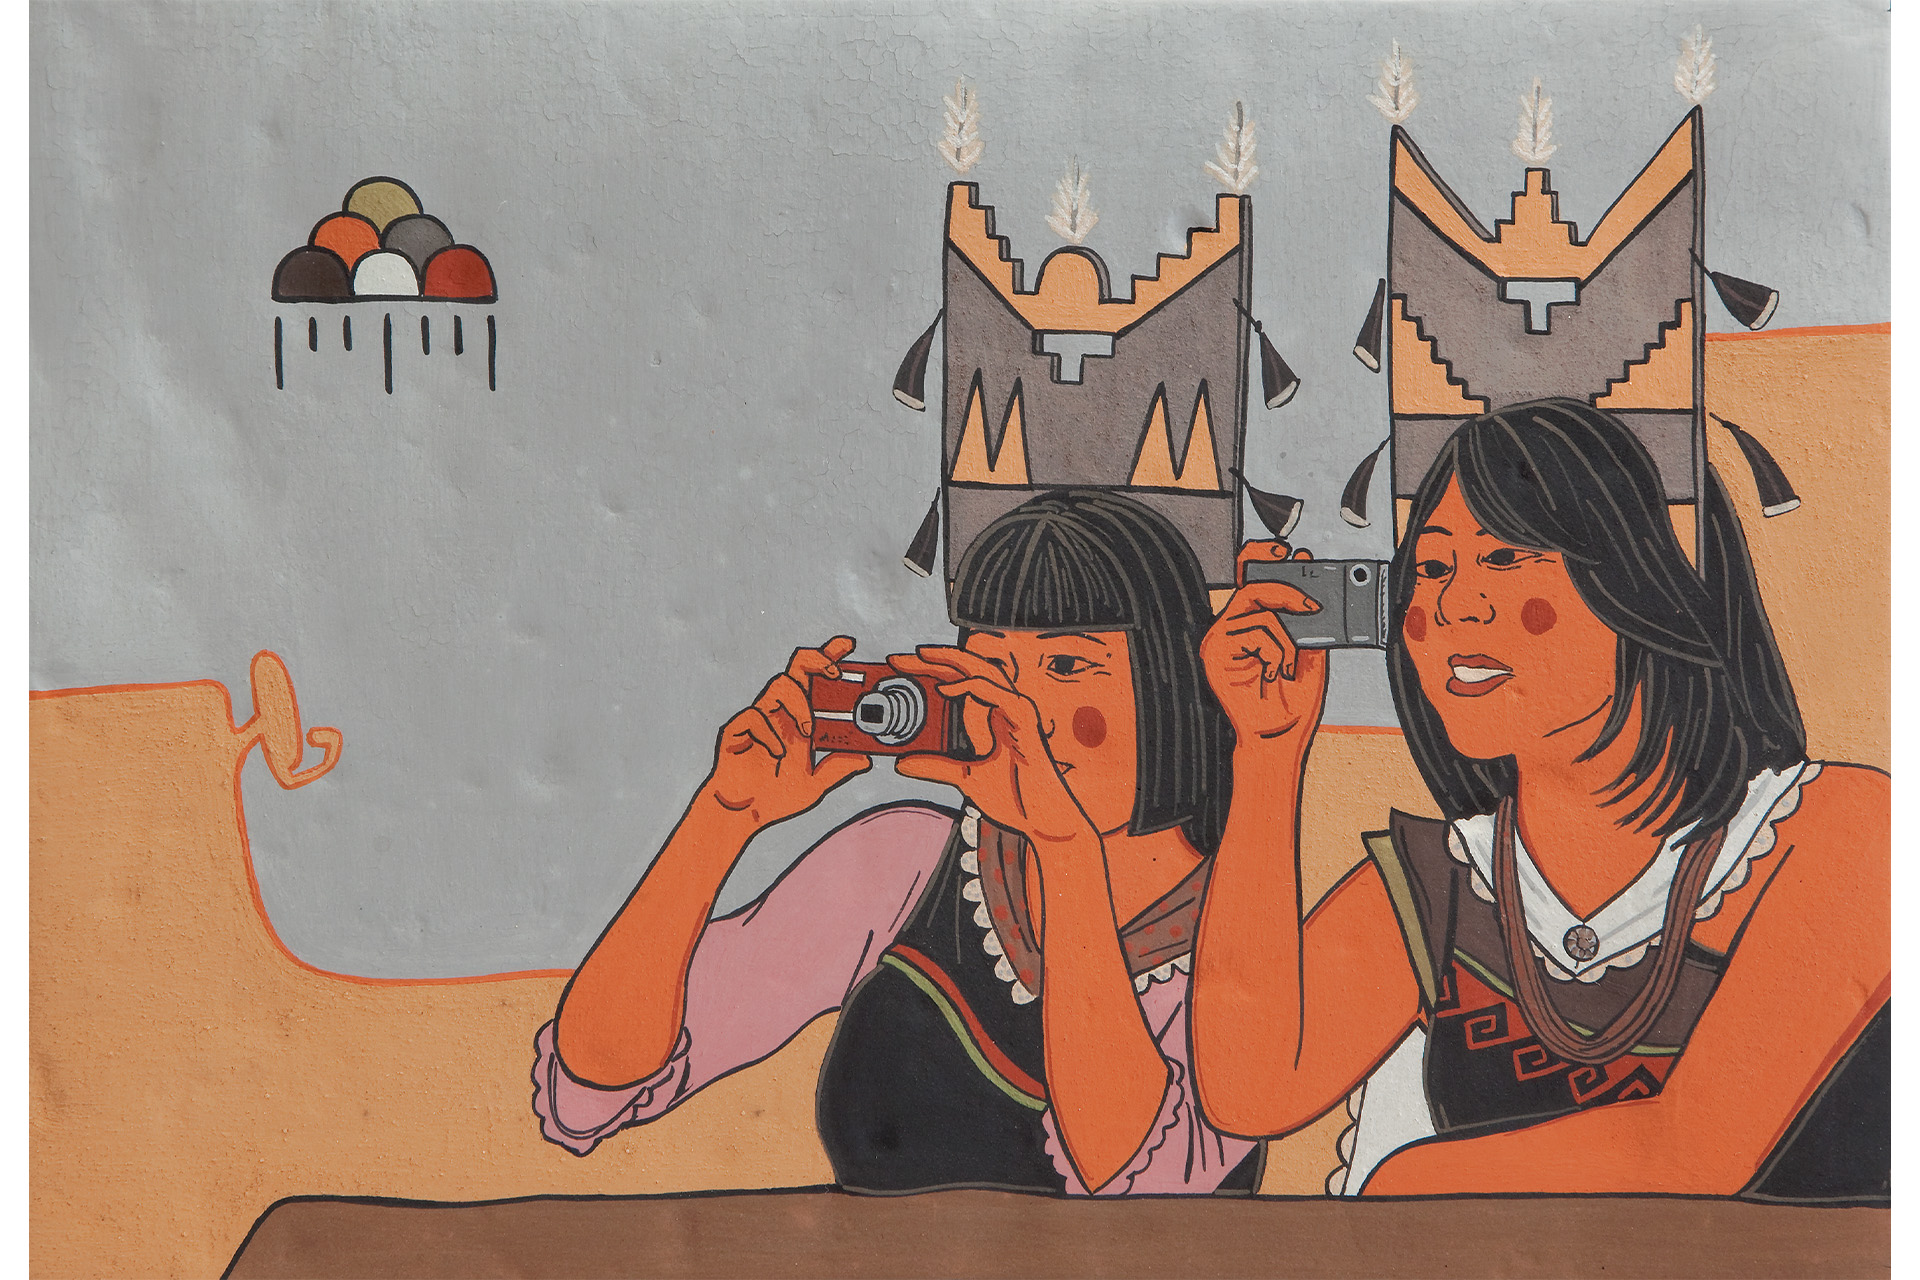 A print of two Native women snapping photos with digital cameras.